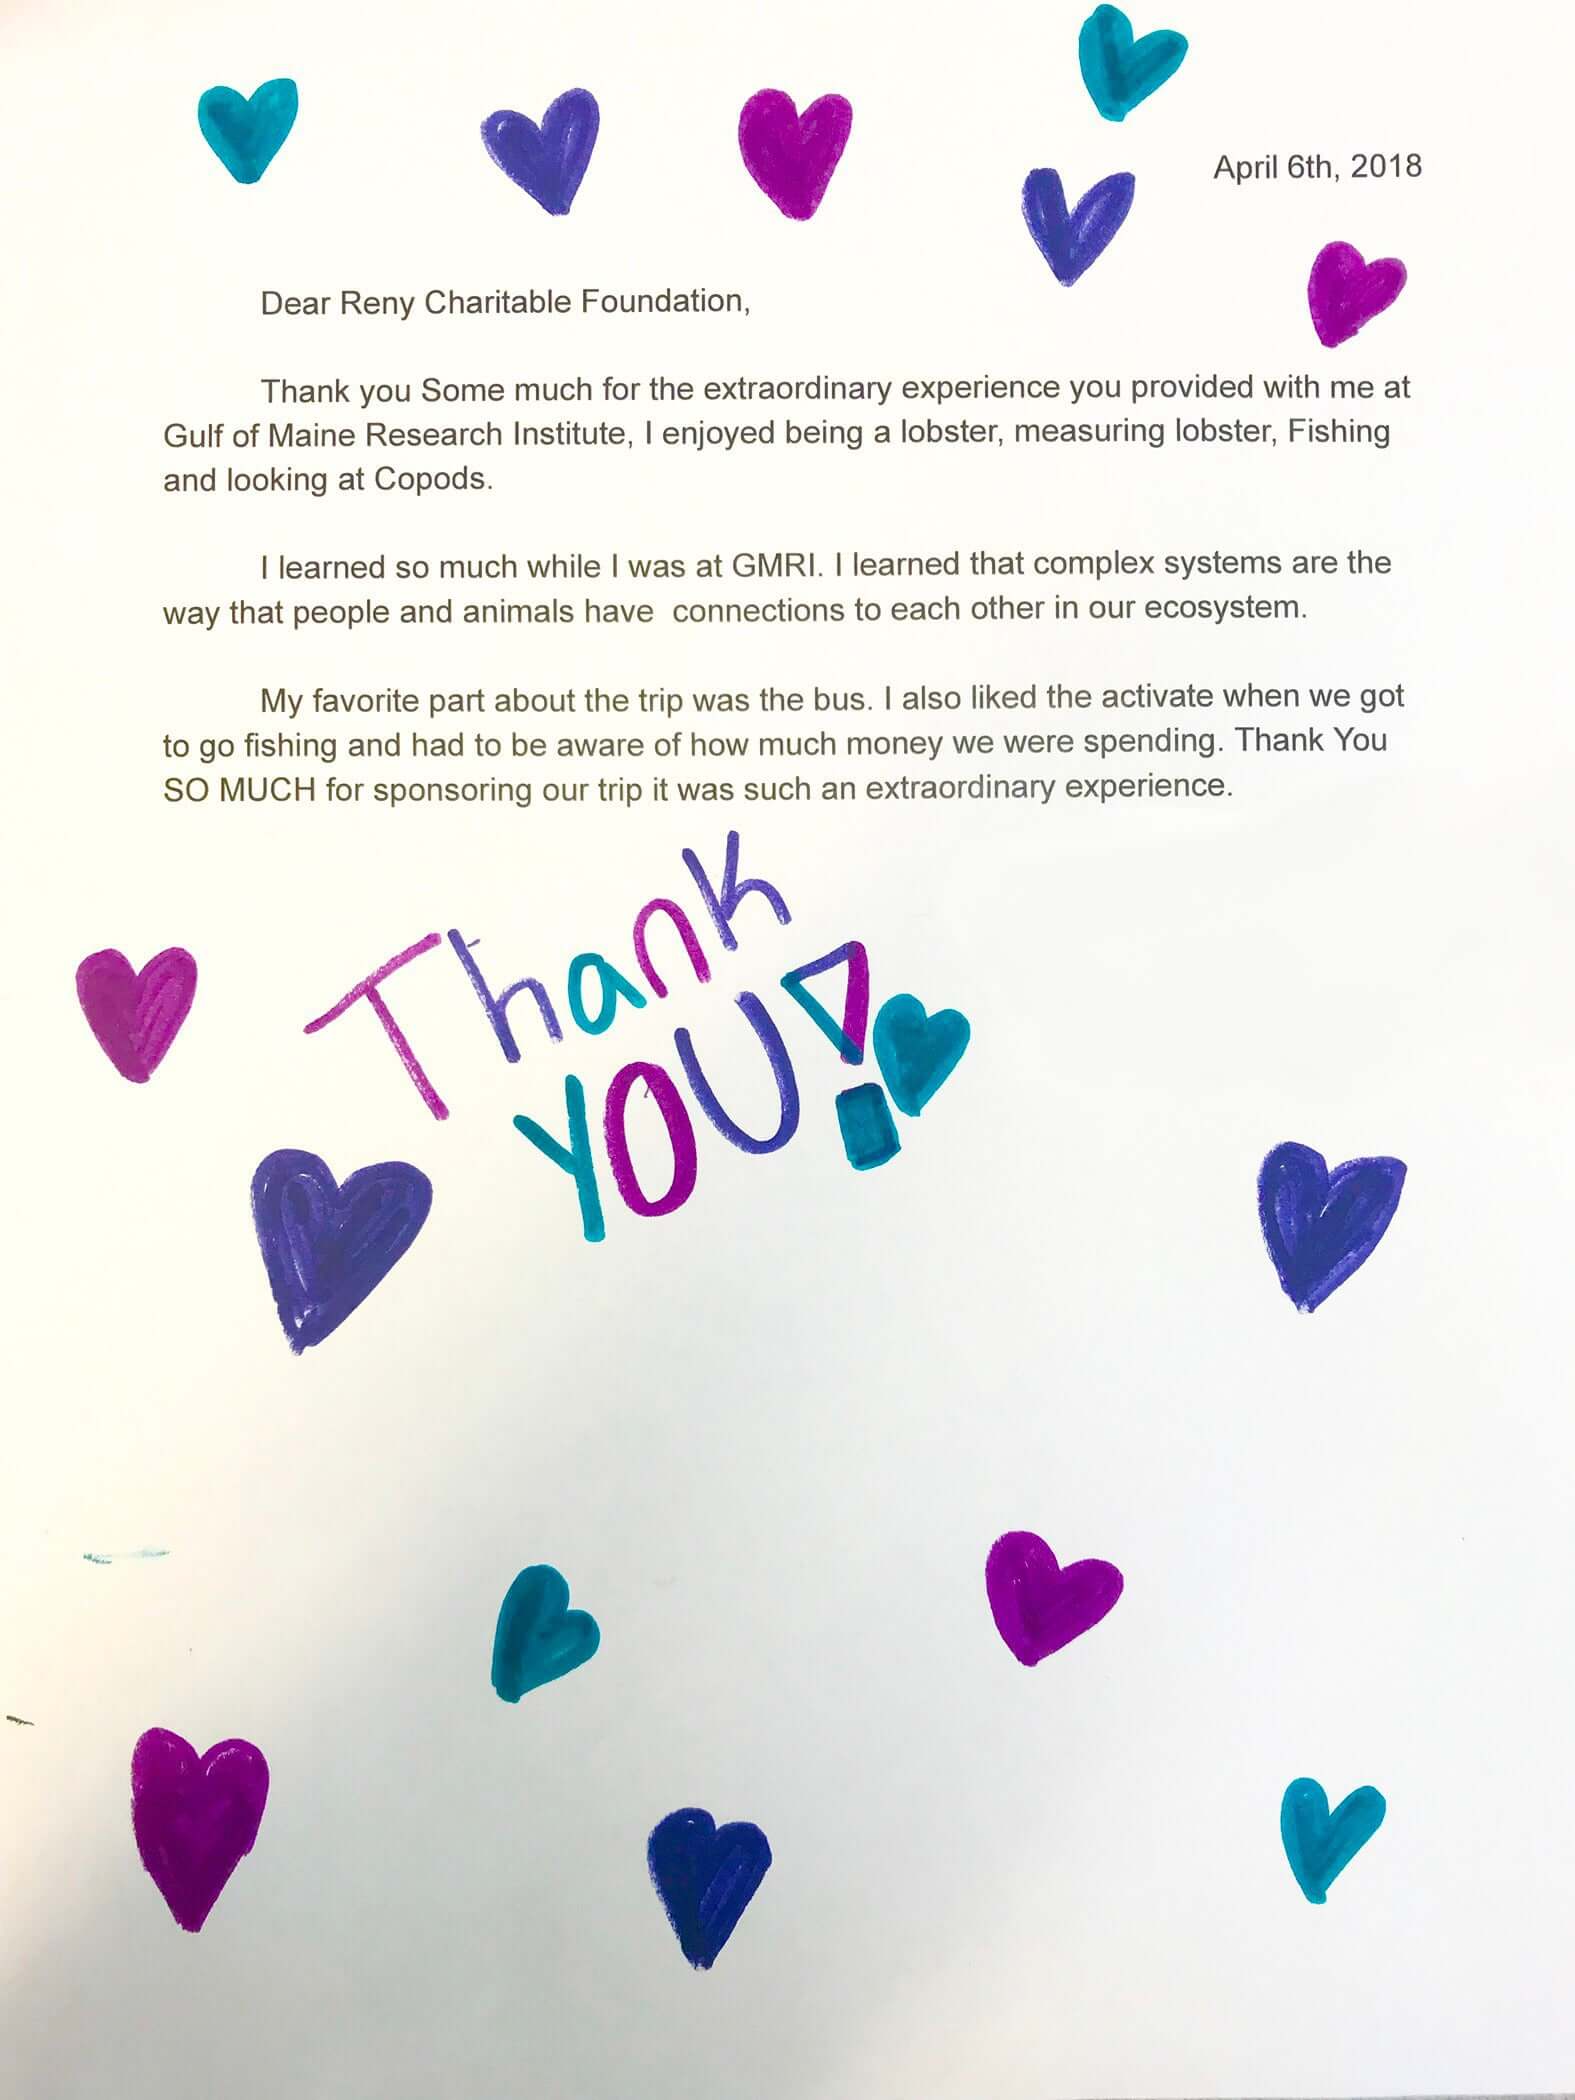 Thank you letter to Reny Charitable Foundation